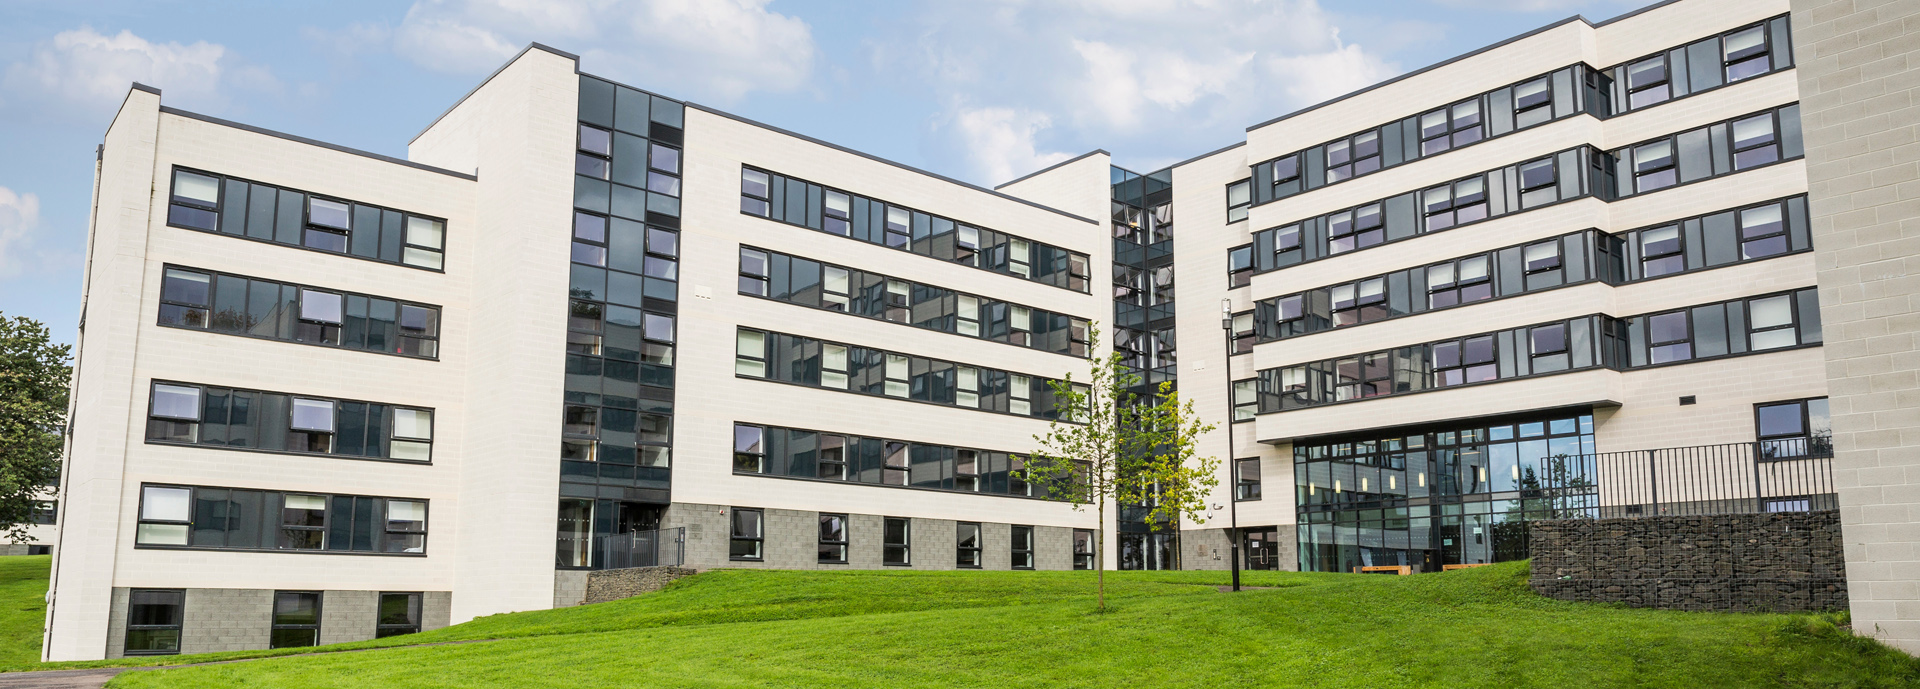 Student housing exterior in Stirling, Scotland.